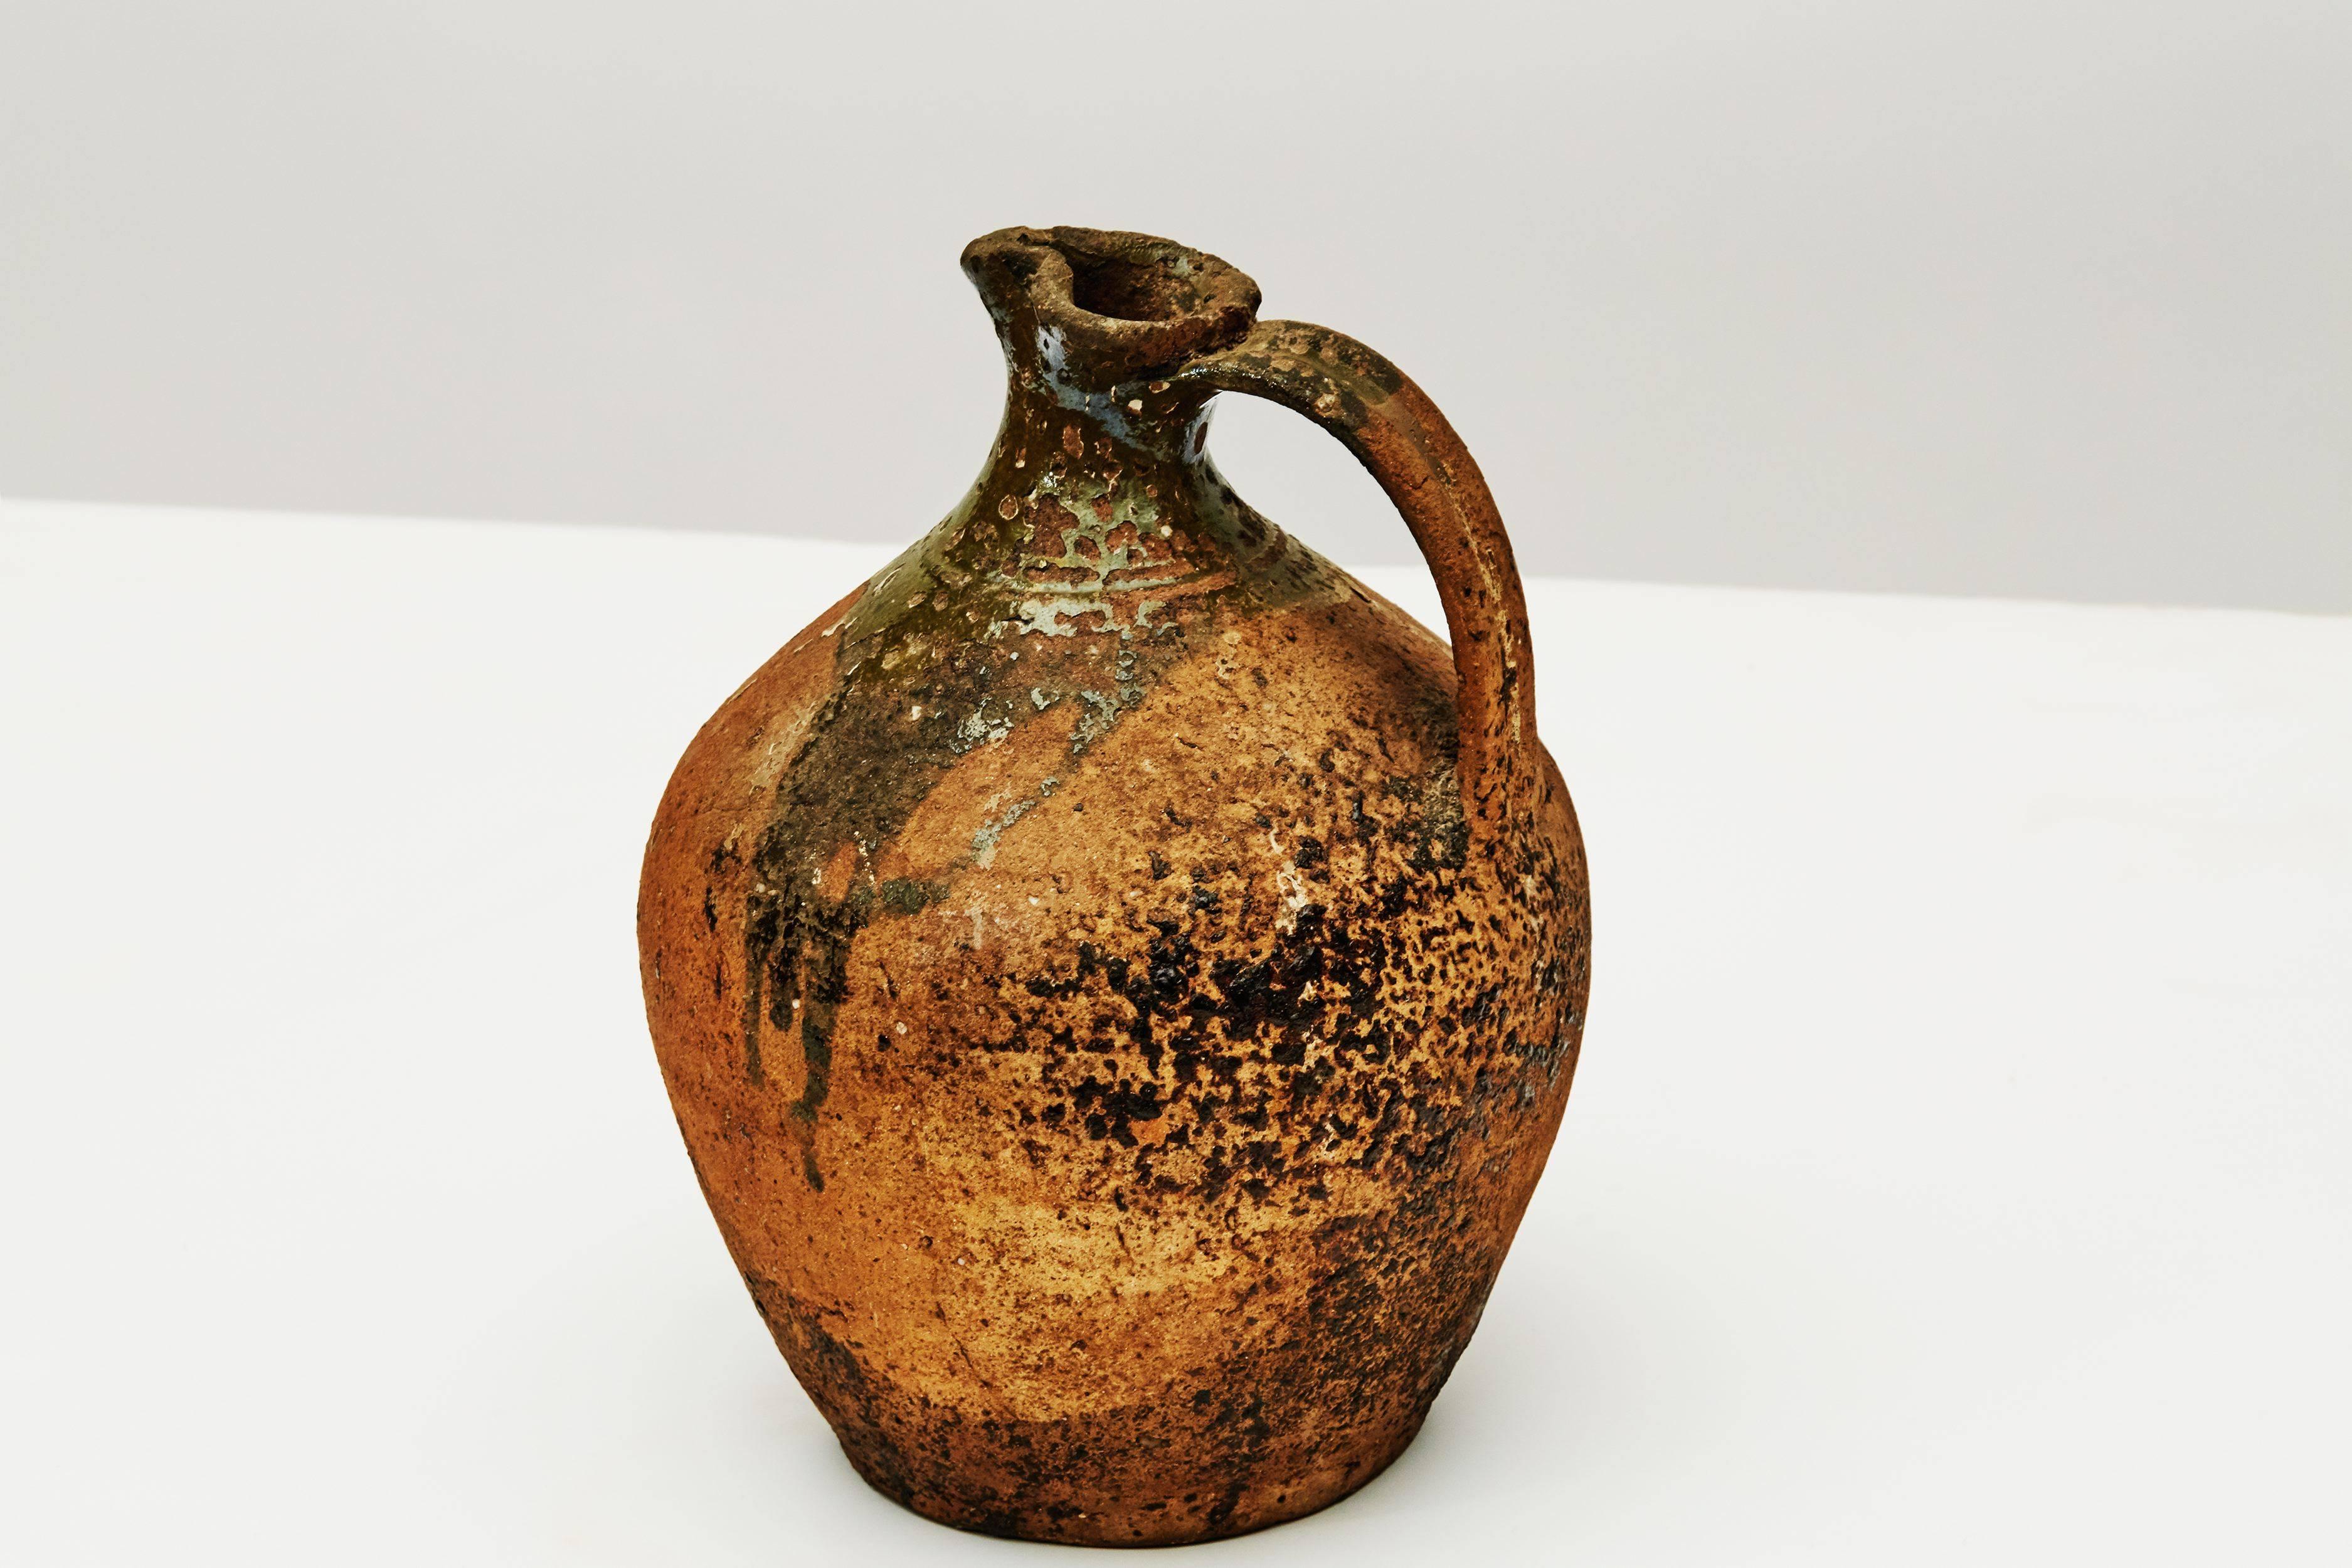 A ceramic jug hailing from Central Europe, and created in the mid-19th century, this piece, which was once held in famed designer Liz Claiborne's private collection, has an elegantly thin handle and a splayed lip, and has, moreover, been colored